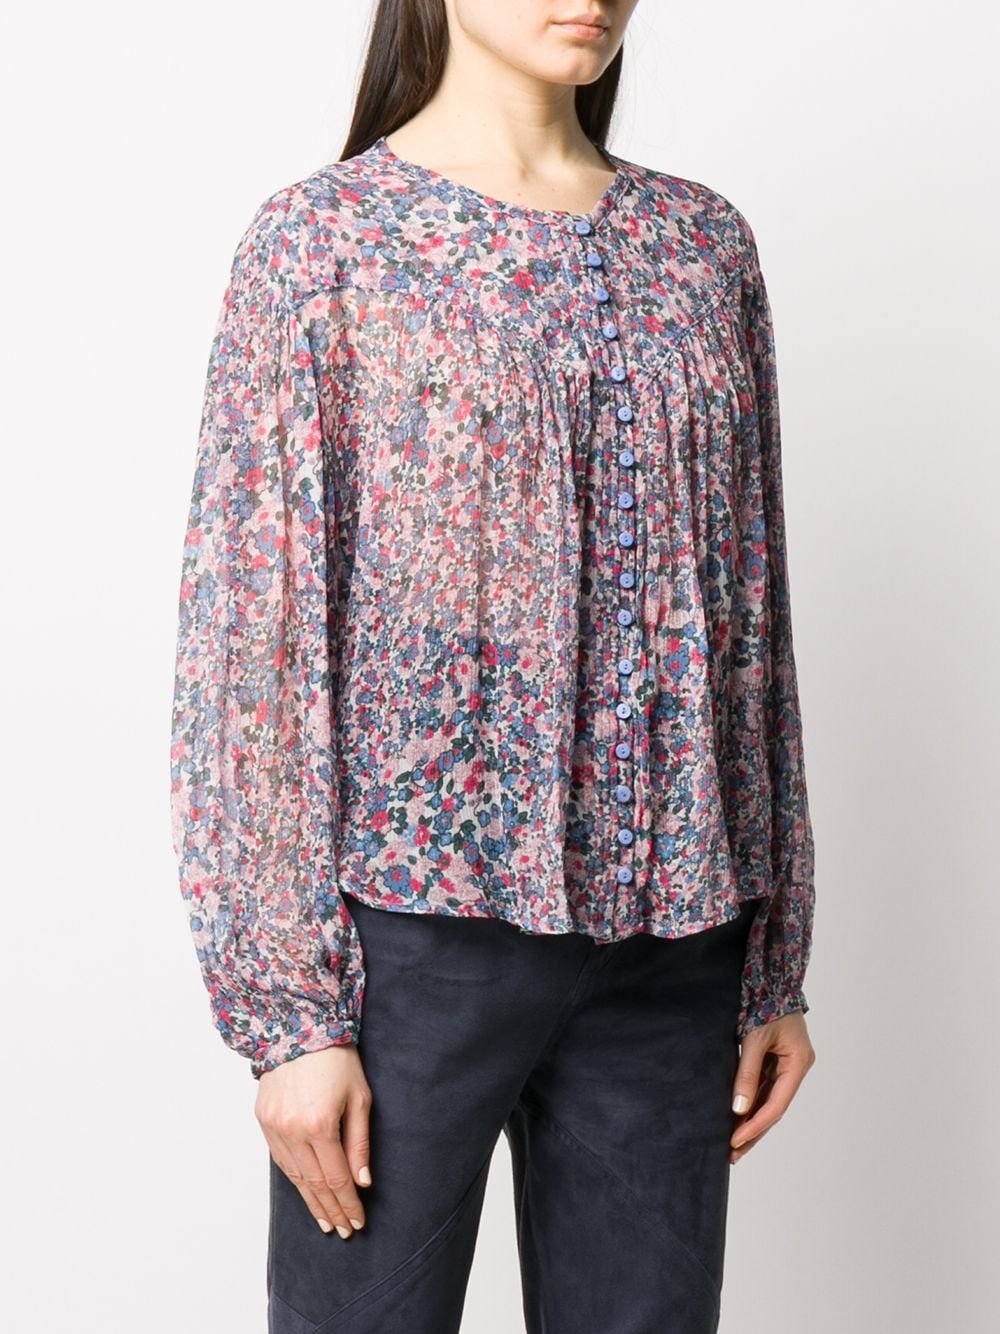 isabel marant ORIONEA SHIRT available on montiboutique.com - 33798